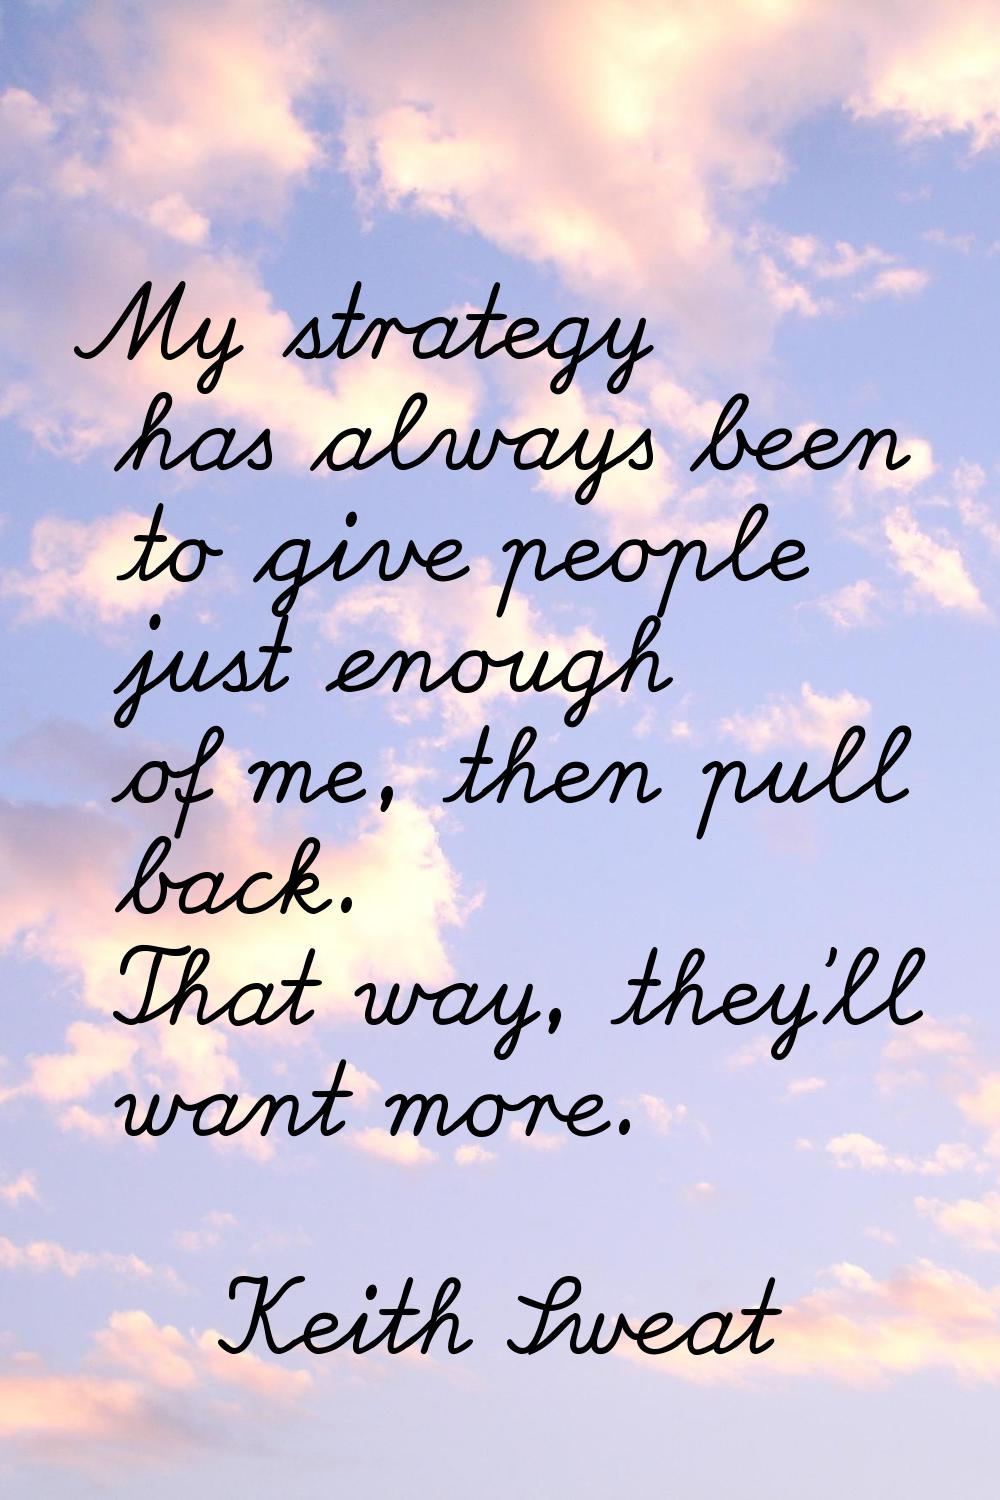 My strategy has always been to give people just enough of me, then pull back. That way, they'll wan